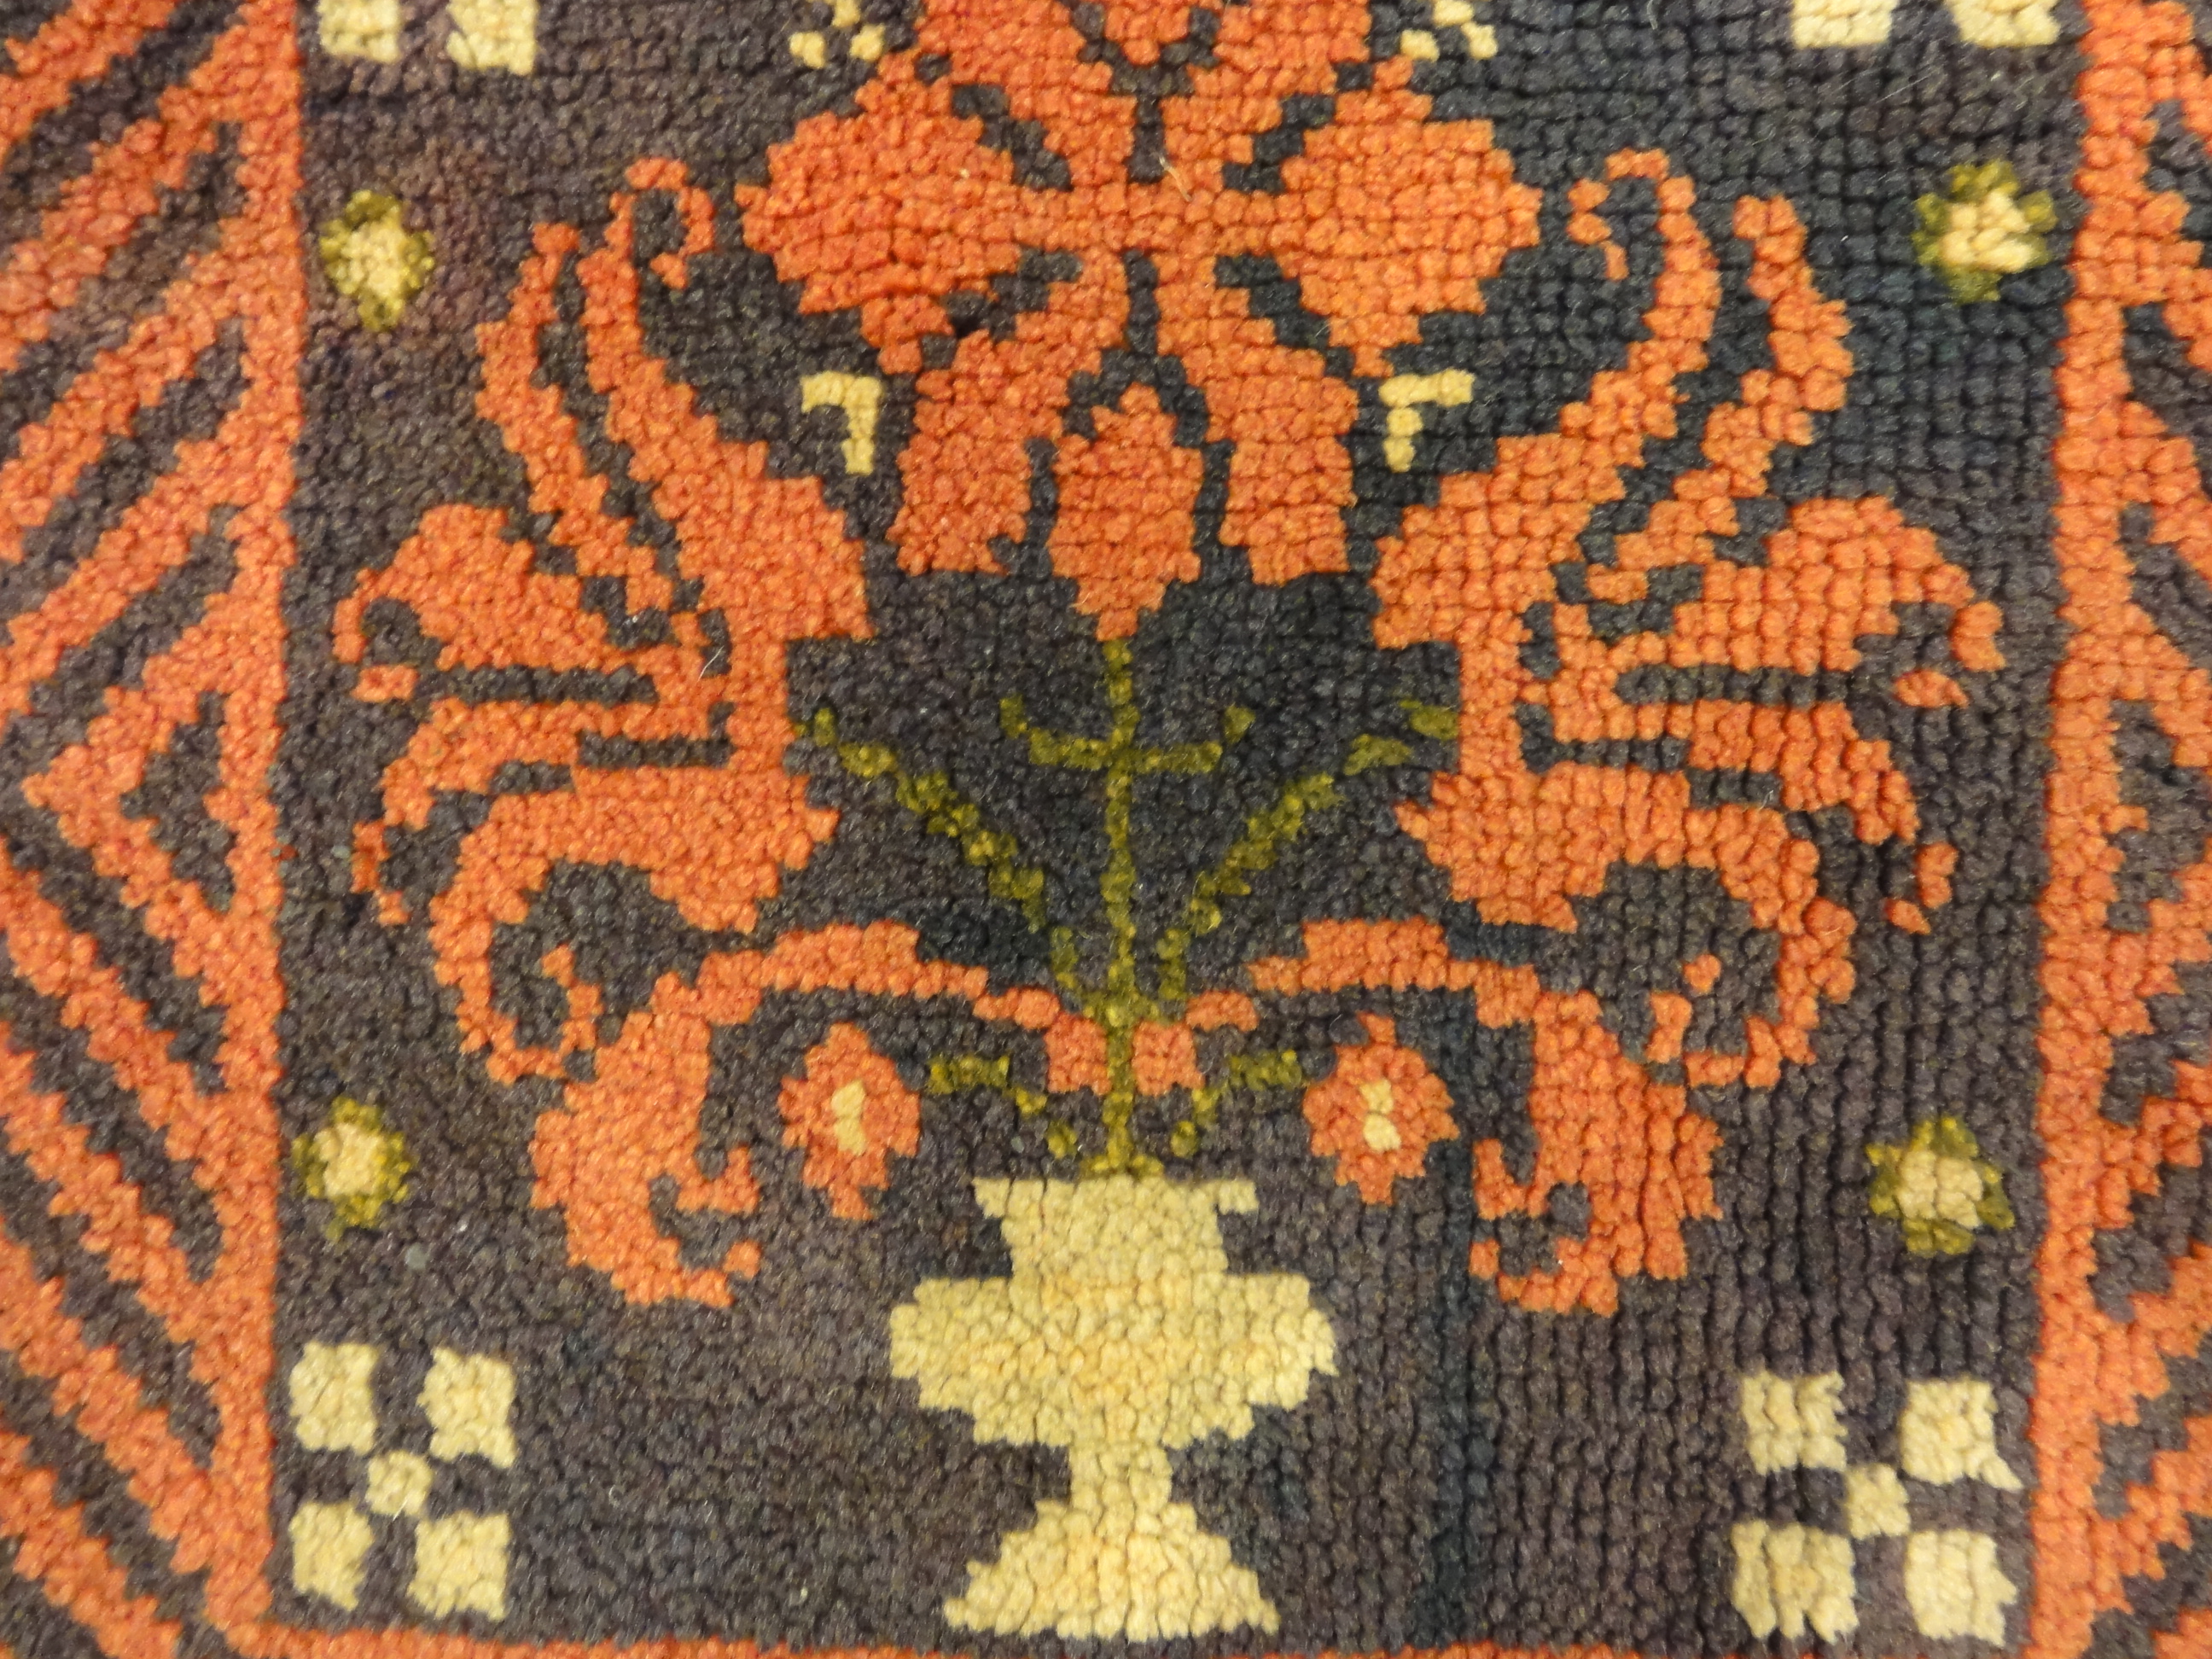 Antique Swedish Floral Pile Rug. A piece of genuine antique woven carpet art sold at Santa Barbara Design Center Rugs and More.